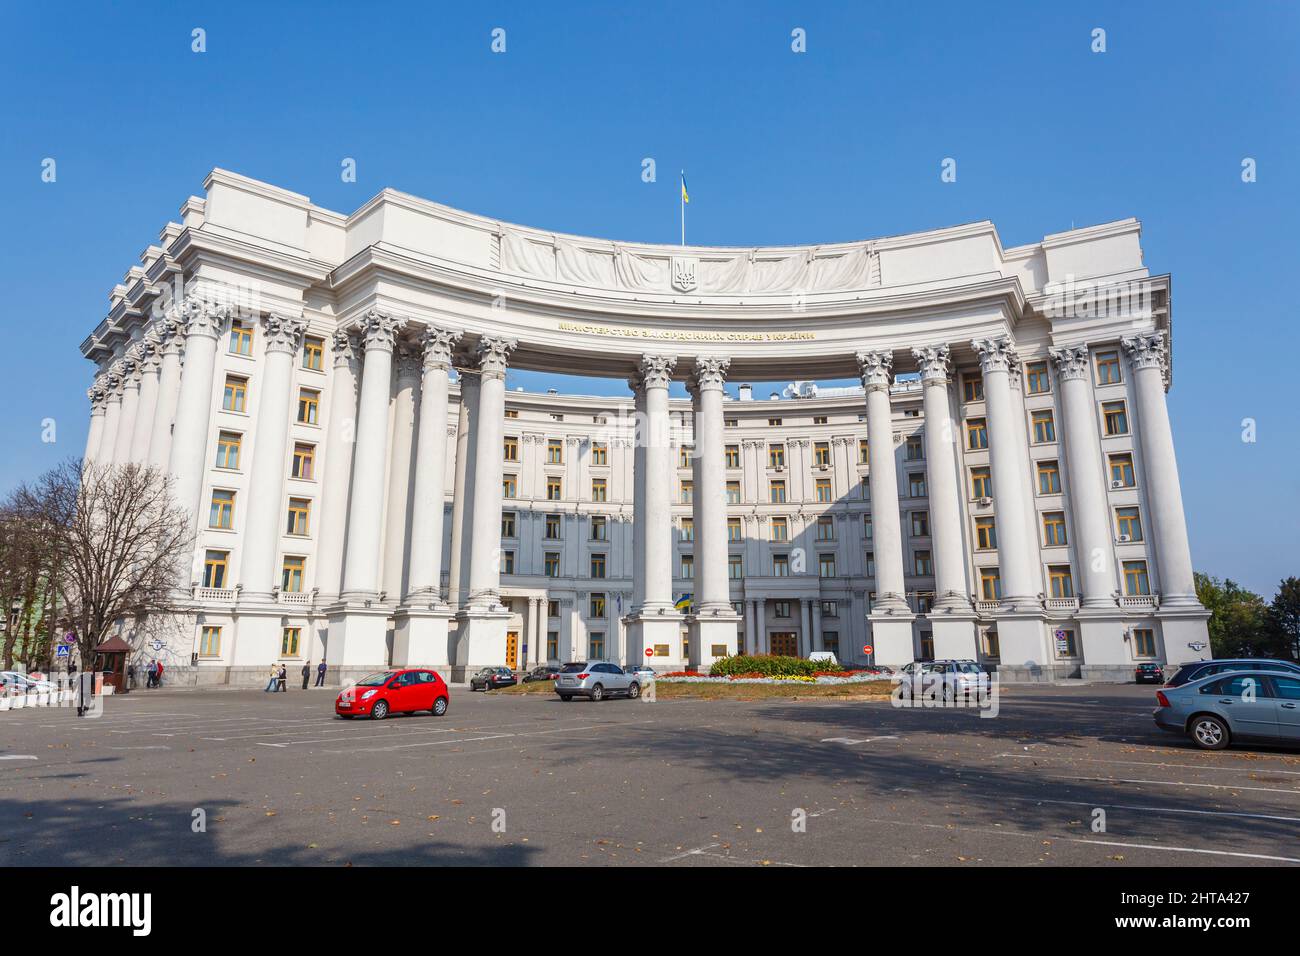 The Stalinist architecture Ministry of Foreign Affairs building in the historic Upper Town District of Old Kiev (Kyiv), capital city of Ukraine Stock Photo